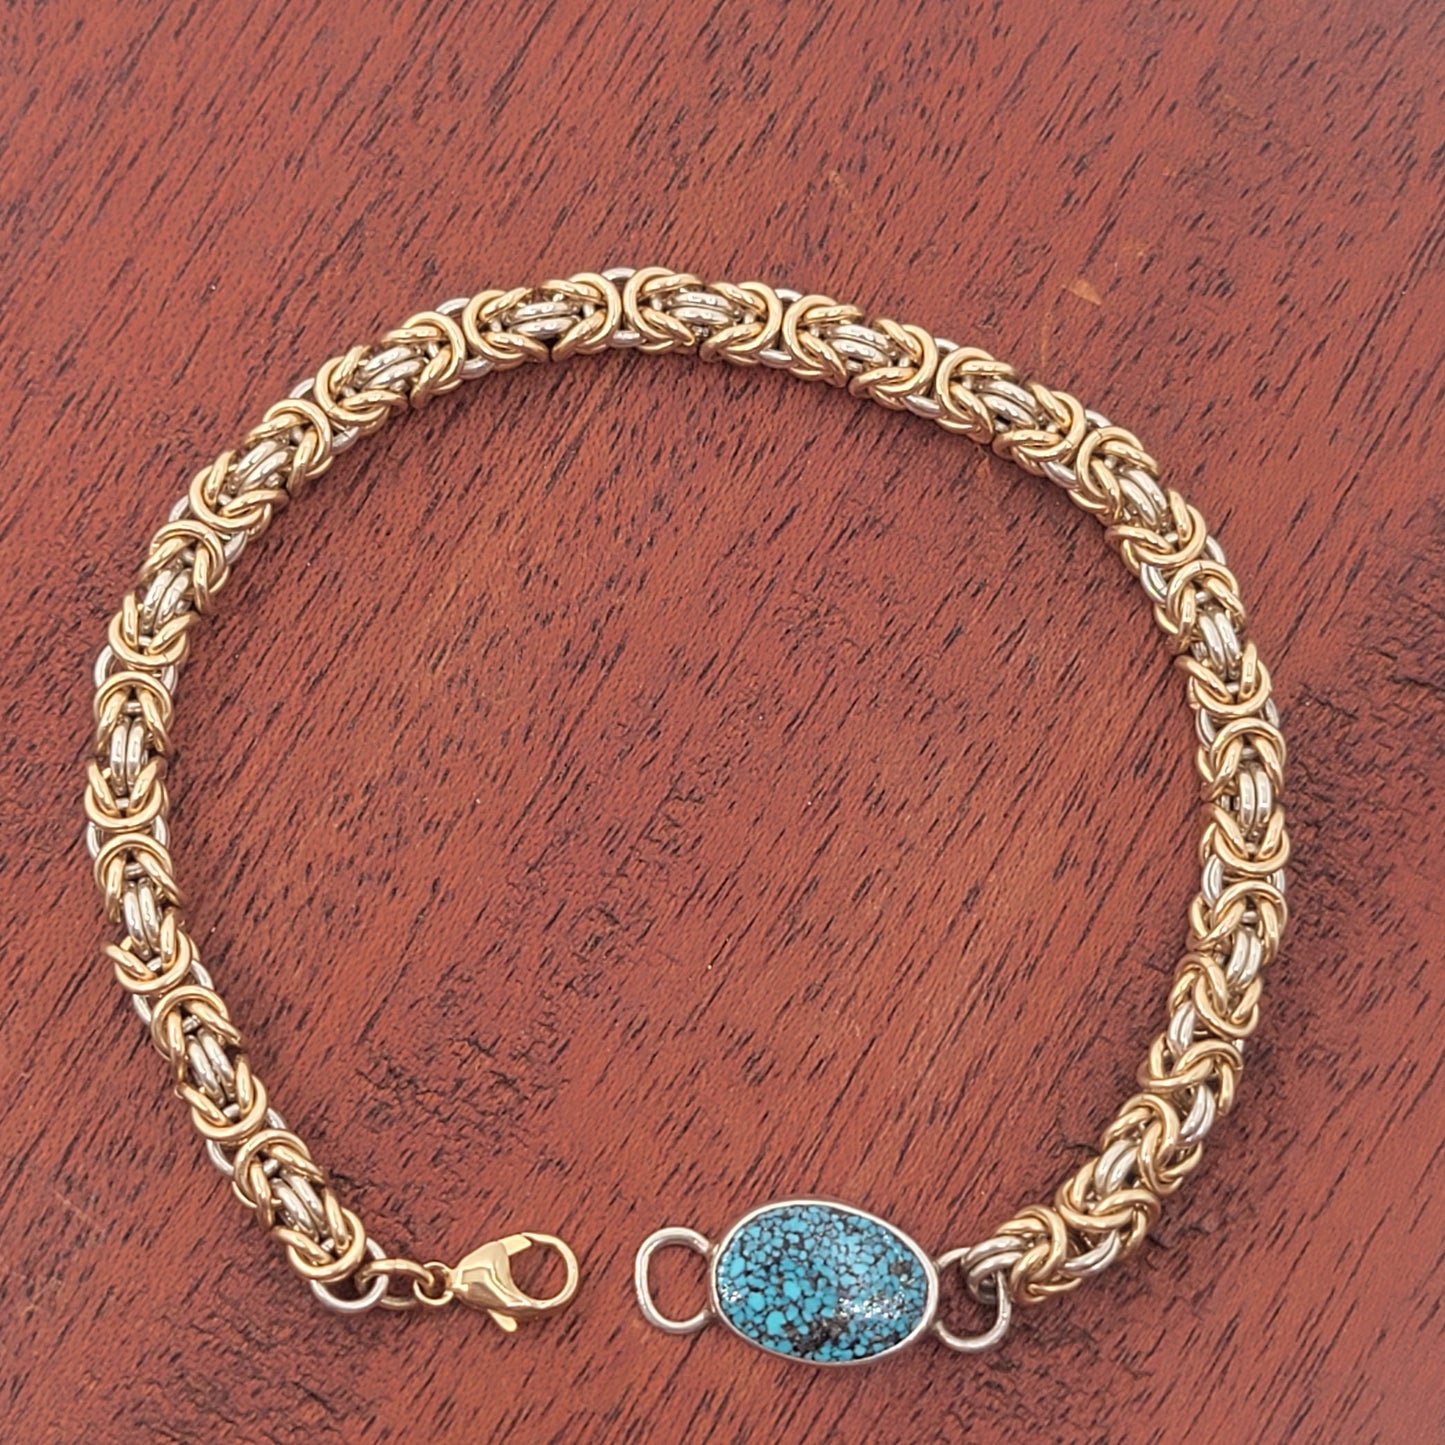 Small Silver and Gold Chain Bracelet with Turquoise